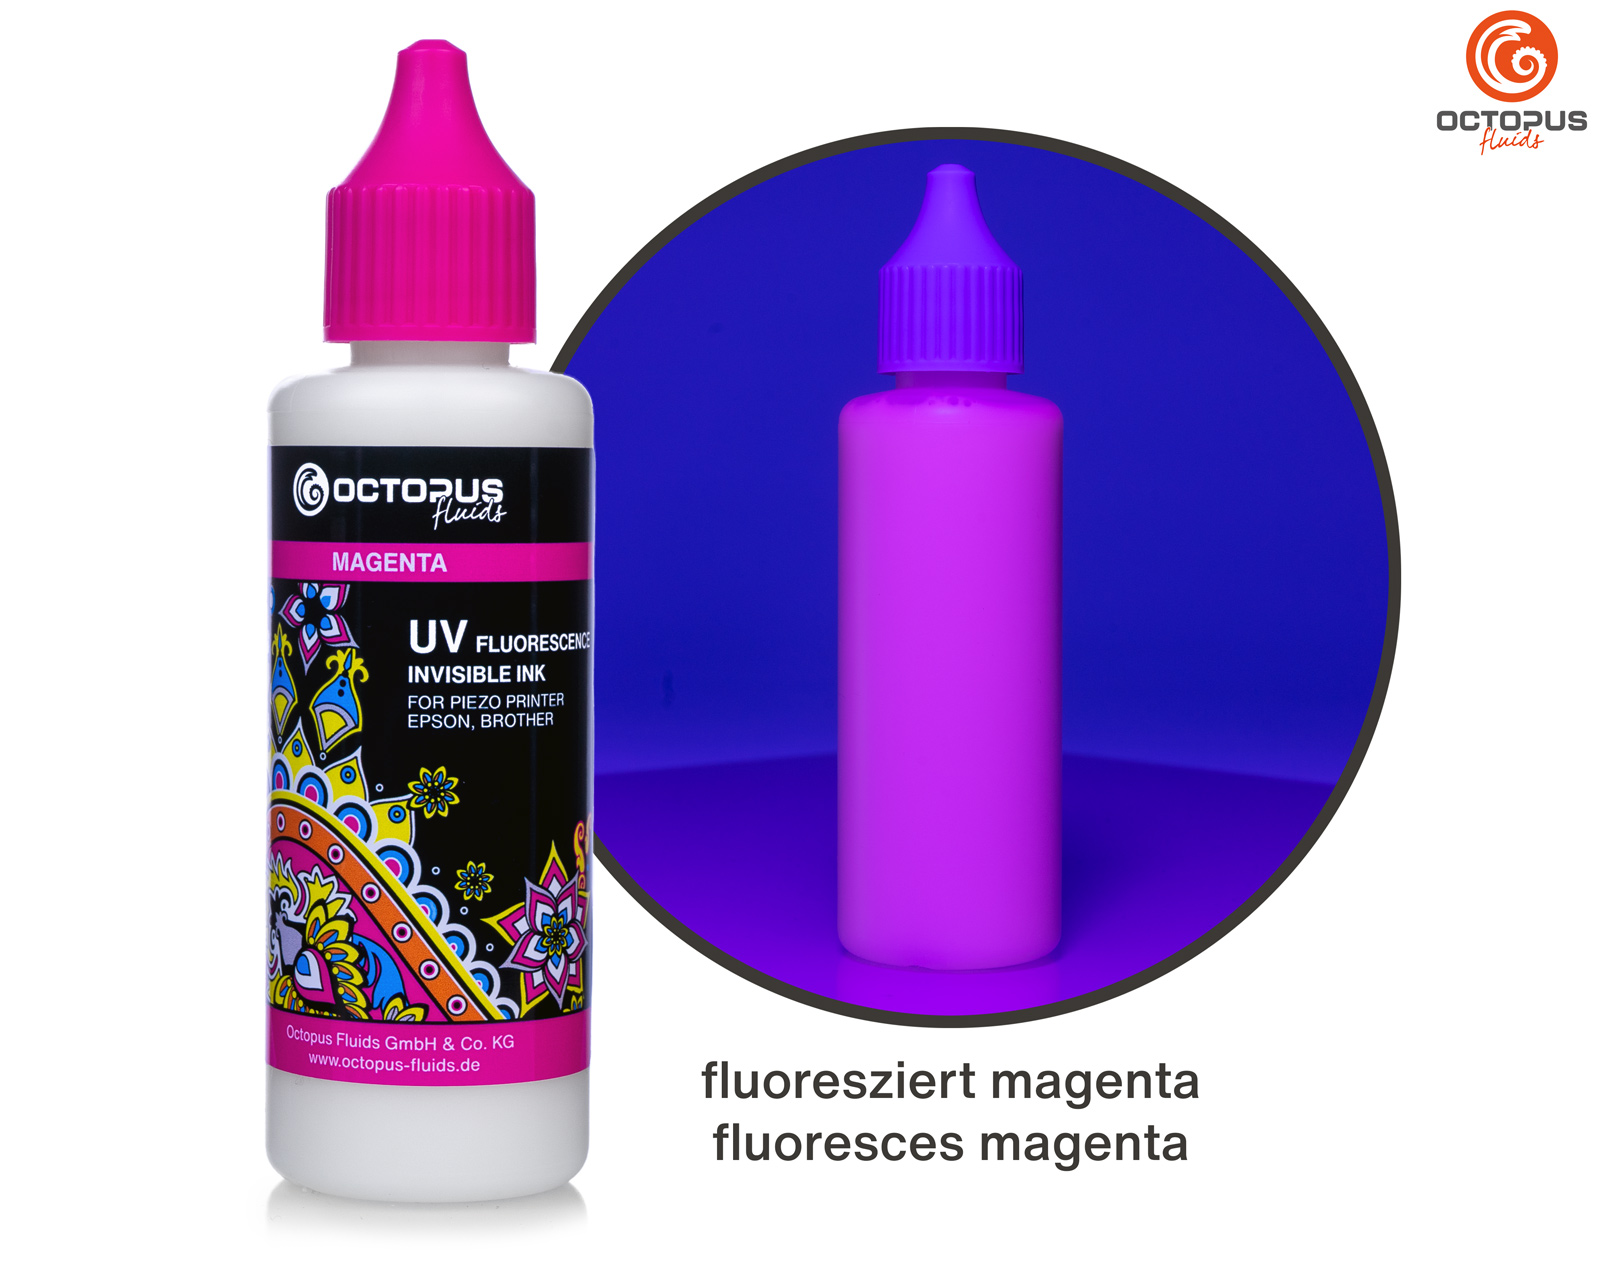 UV fluorescence invisible ink for piezo print heads Epson, Brother, magenta